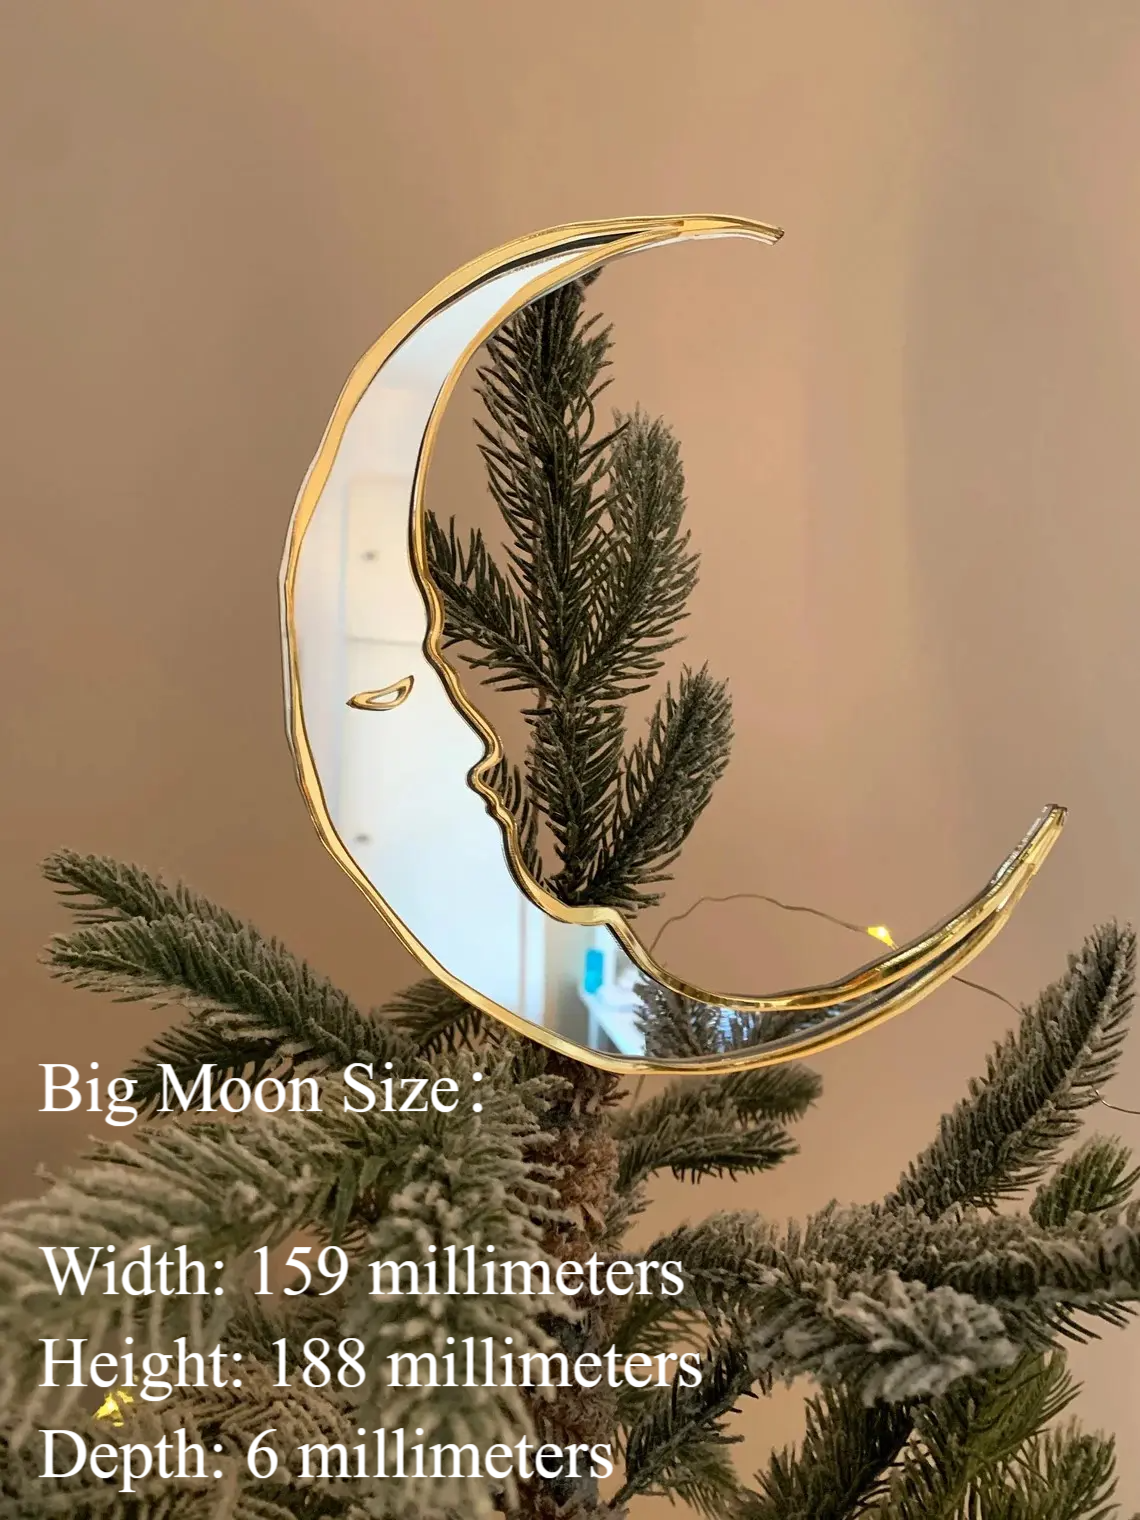 Crescent moon and star Christmas tree ornaments